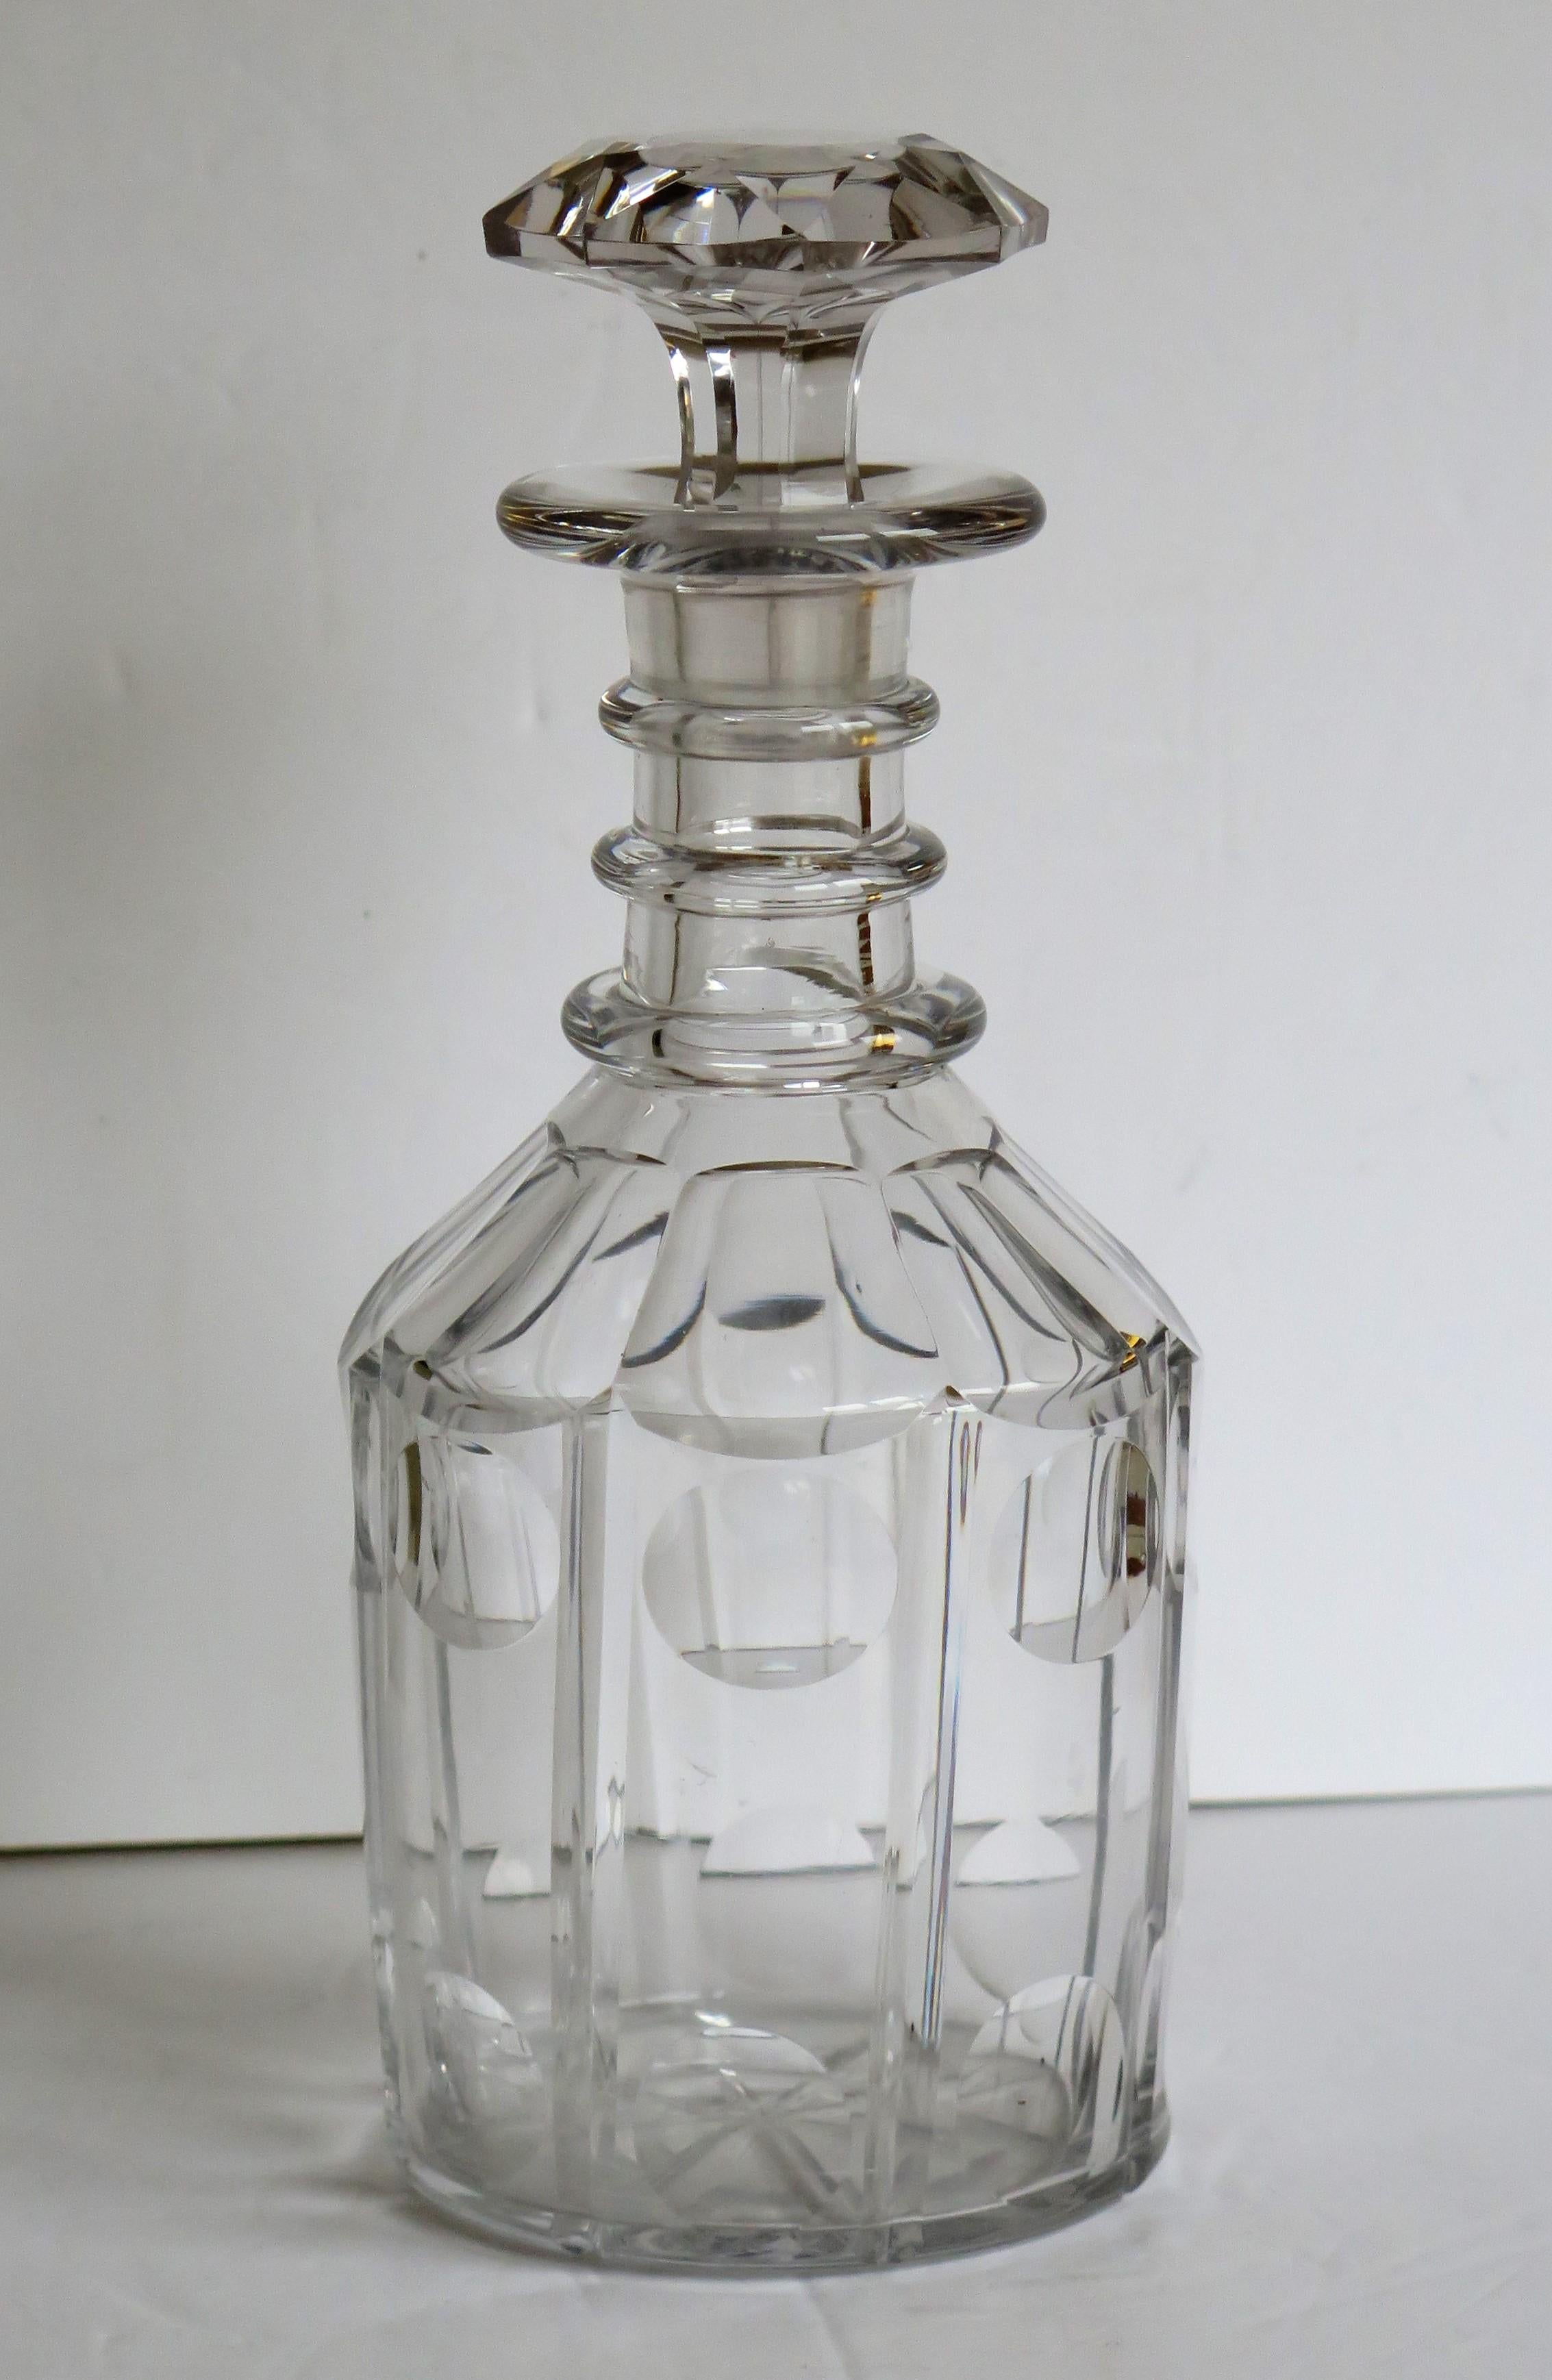 This is a good Anglo-Irish cut-glass or crystal decanter made early in the 19th century, circa 1820, during the English Regency, late Georgian period.

The decanter is nominally straight sided and is beautifully cut in eight vertical columns or